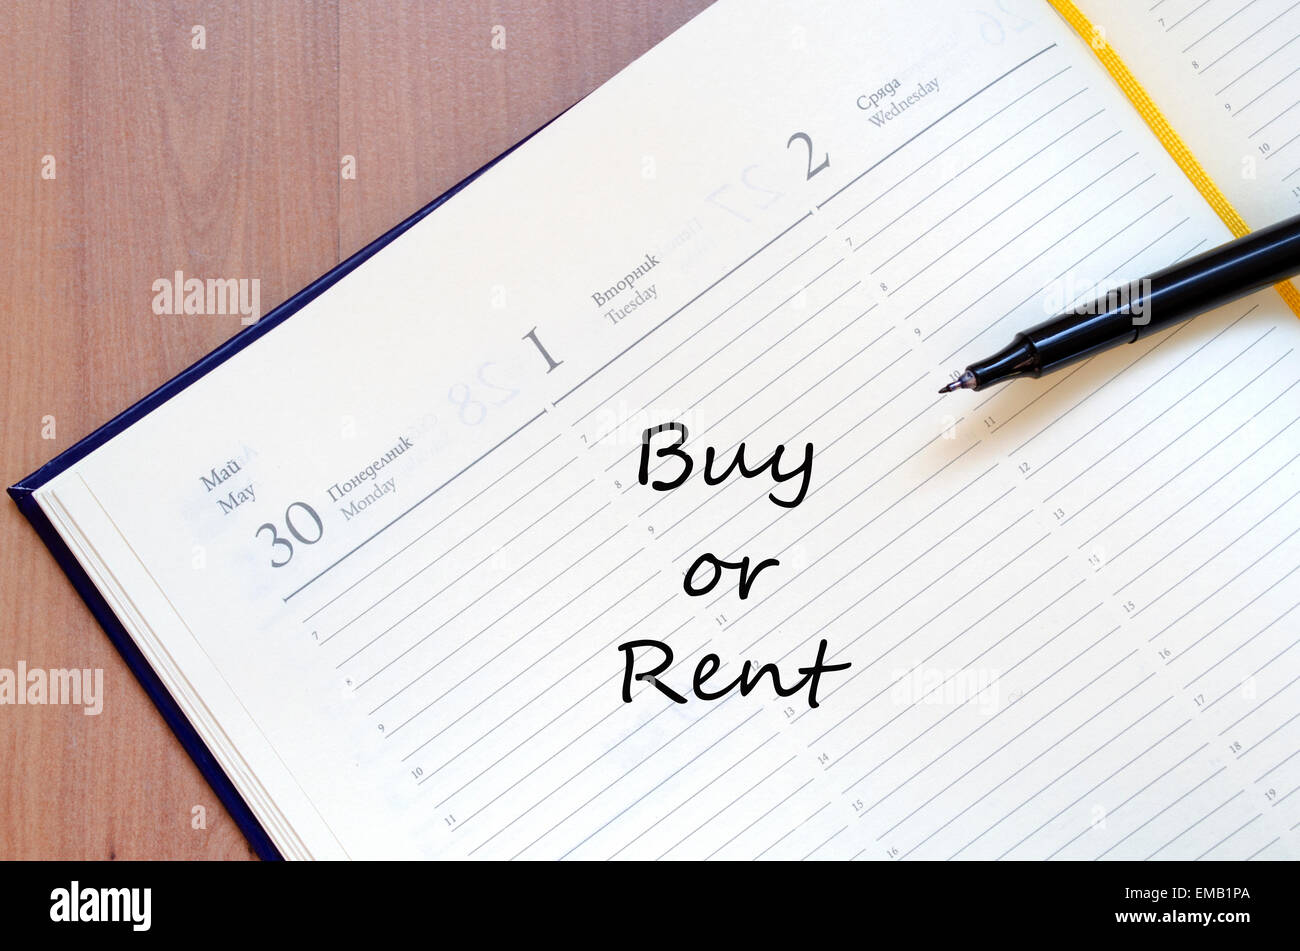 Buy or Rent Concept Notepad Stock Photo